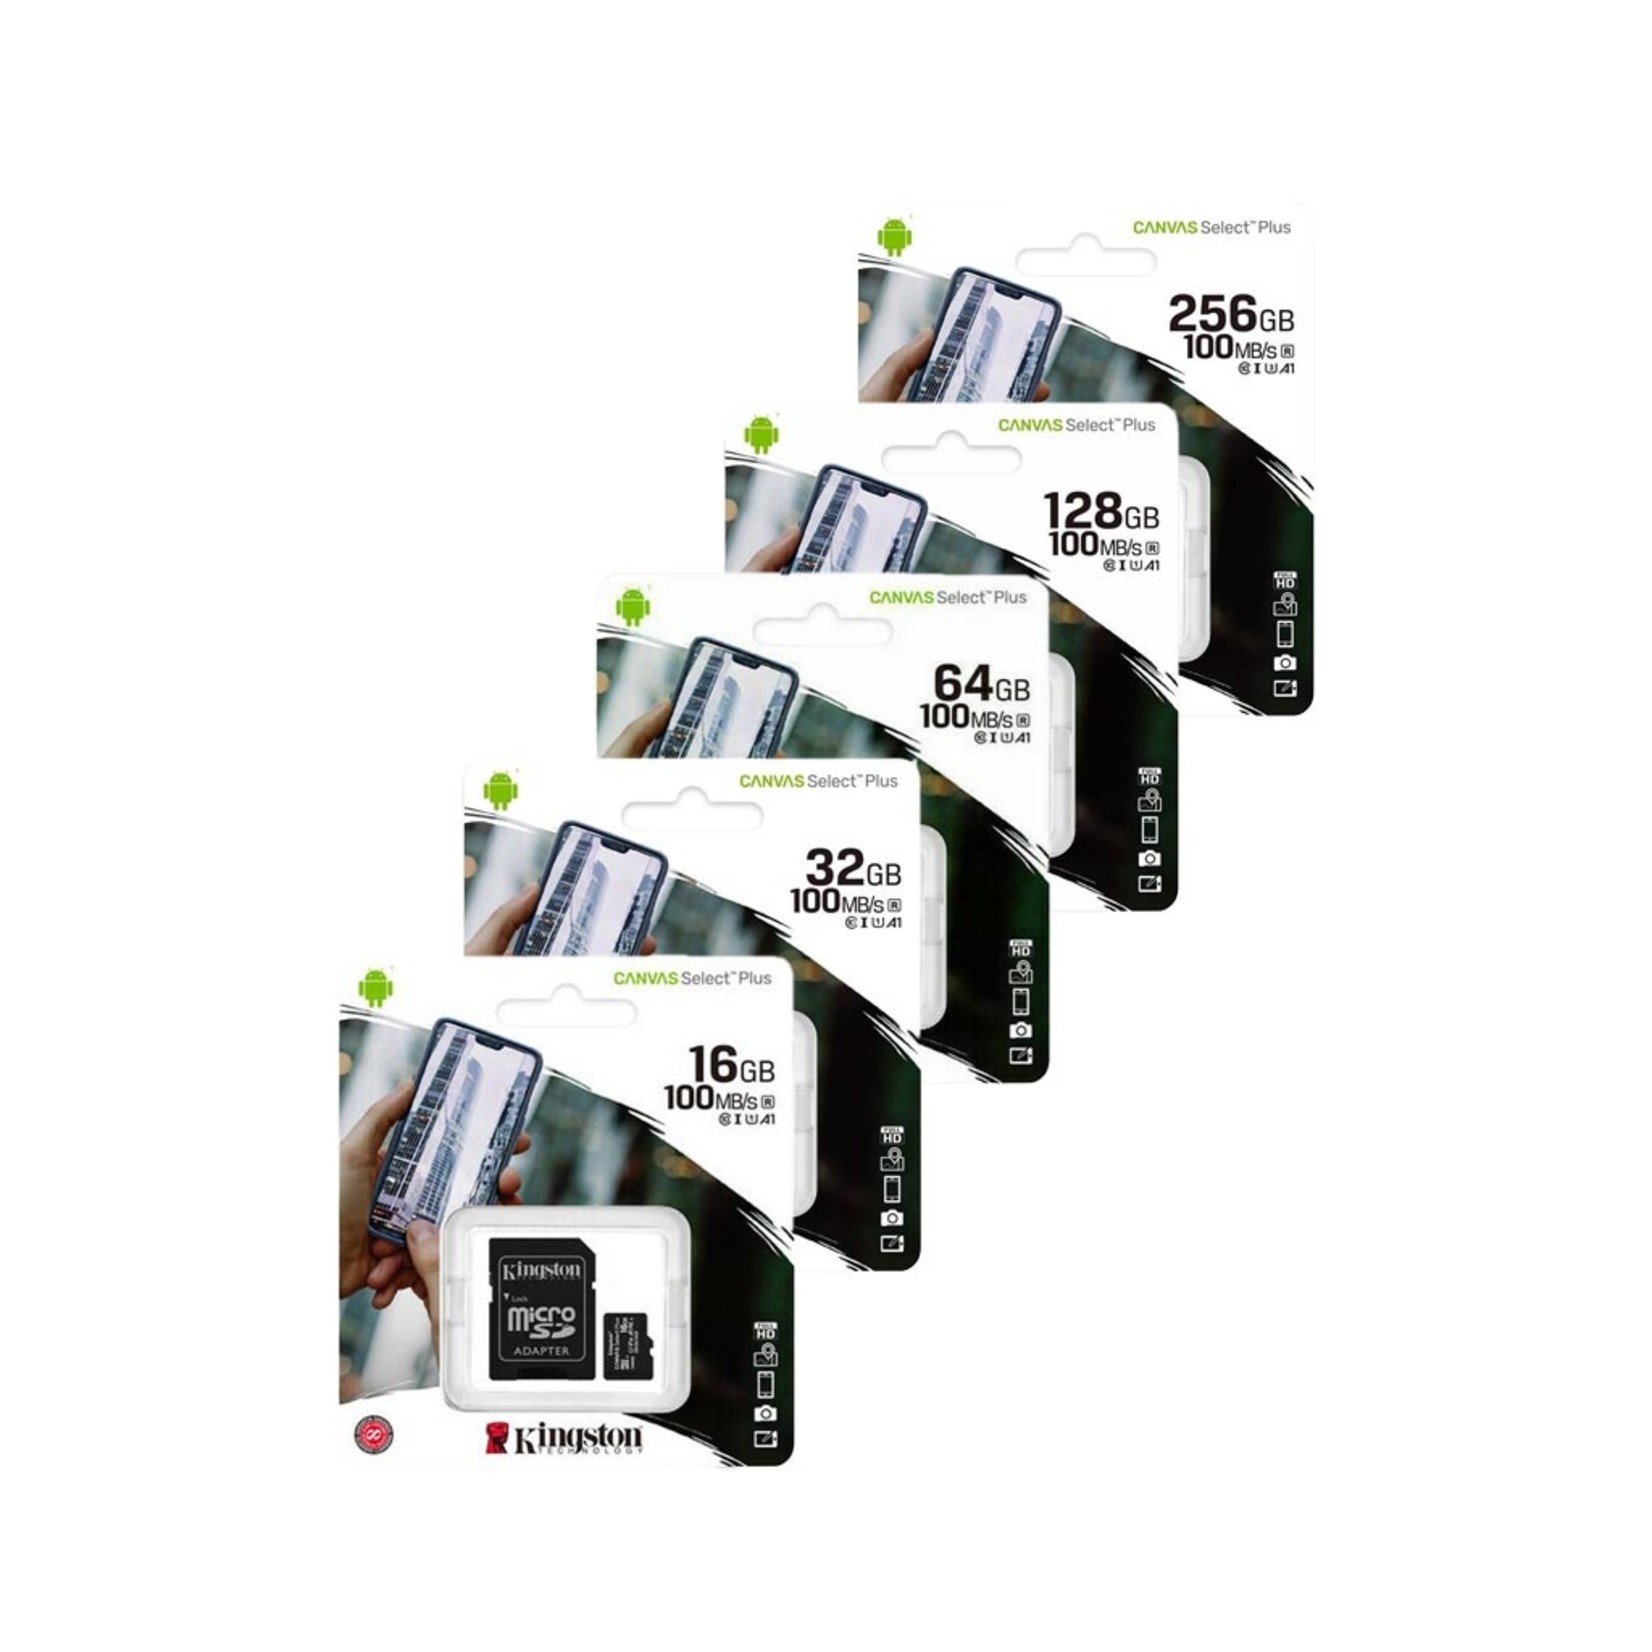 KINGSTON | Class 10 Micro SD Memory Cards with Adapter